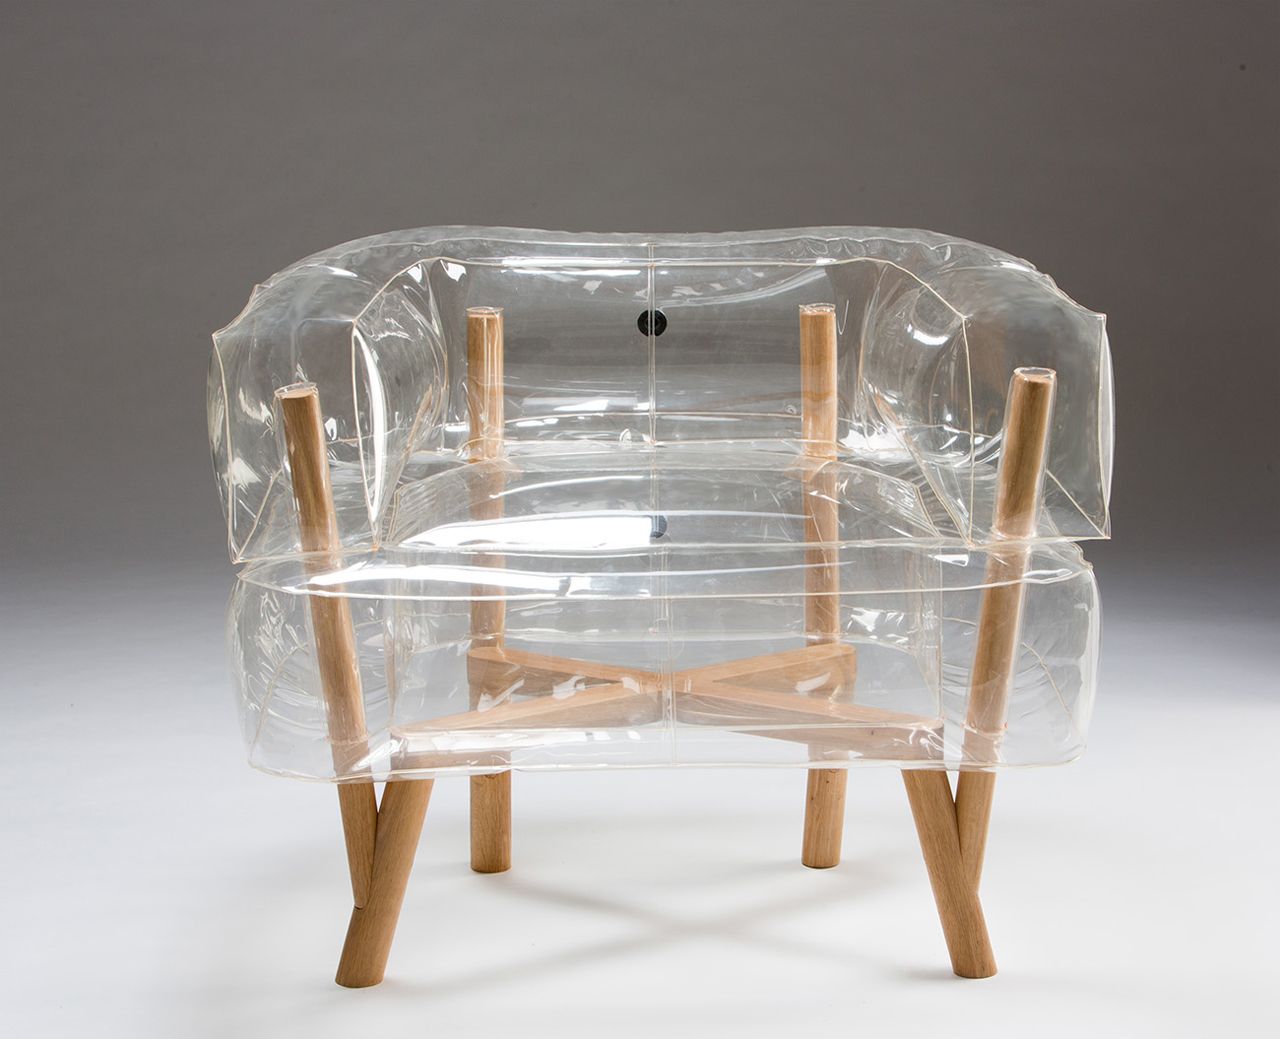 Chic and Convenient: Inflatable Chairs for Portable Comfort